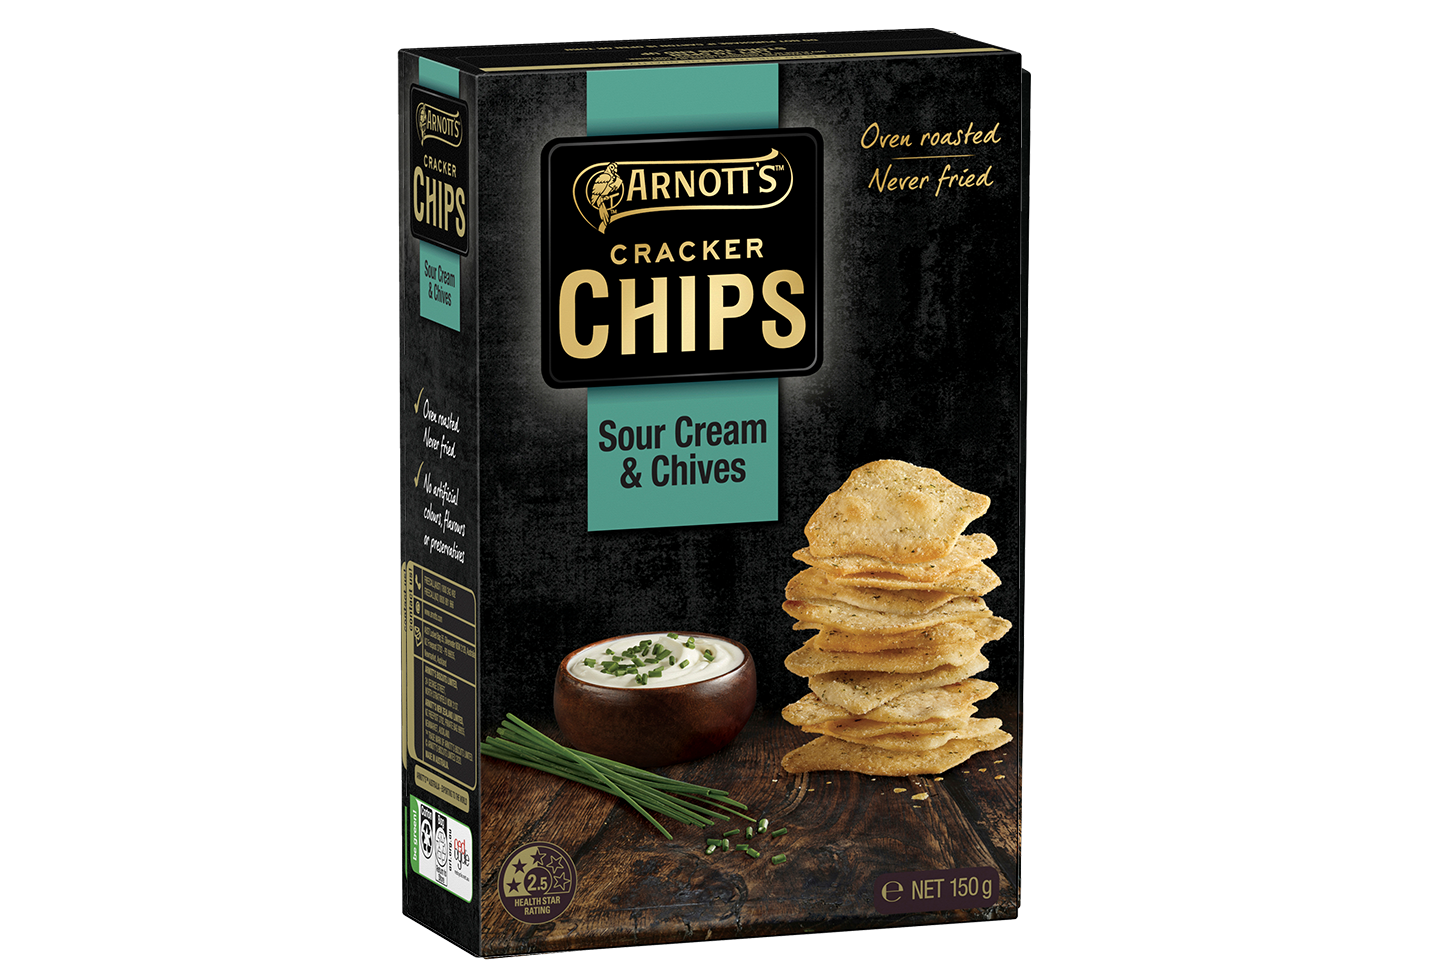  Cracker Chips Sour Cream & Chives